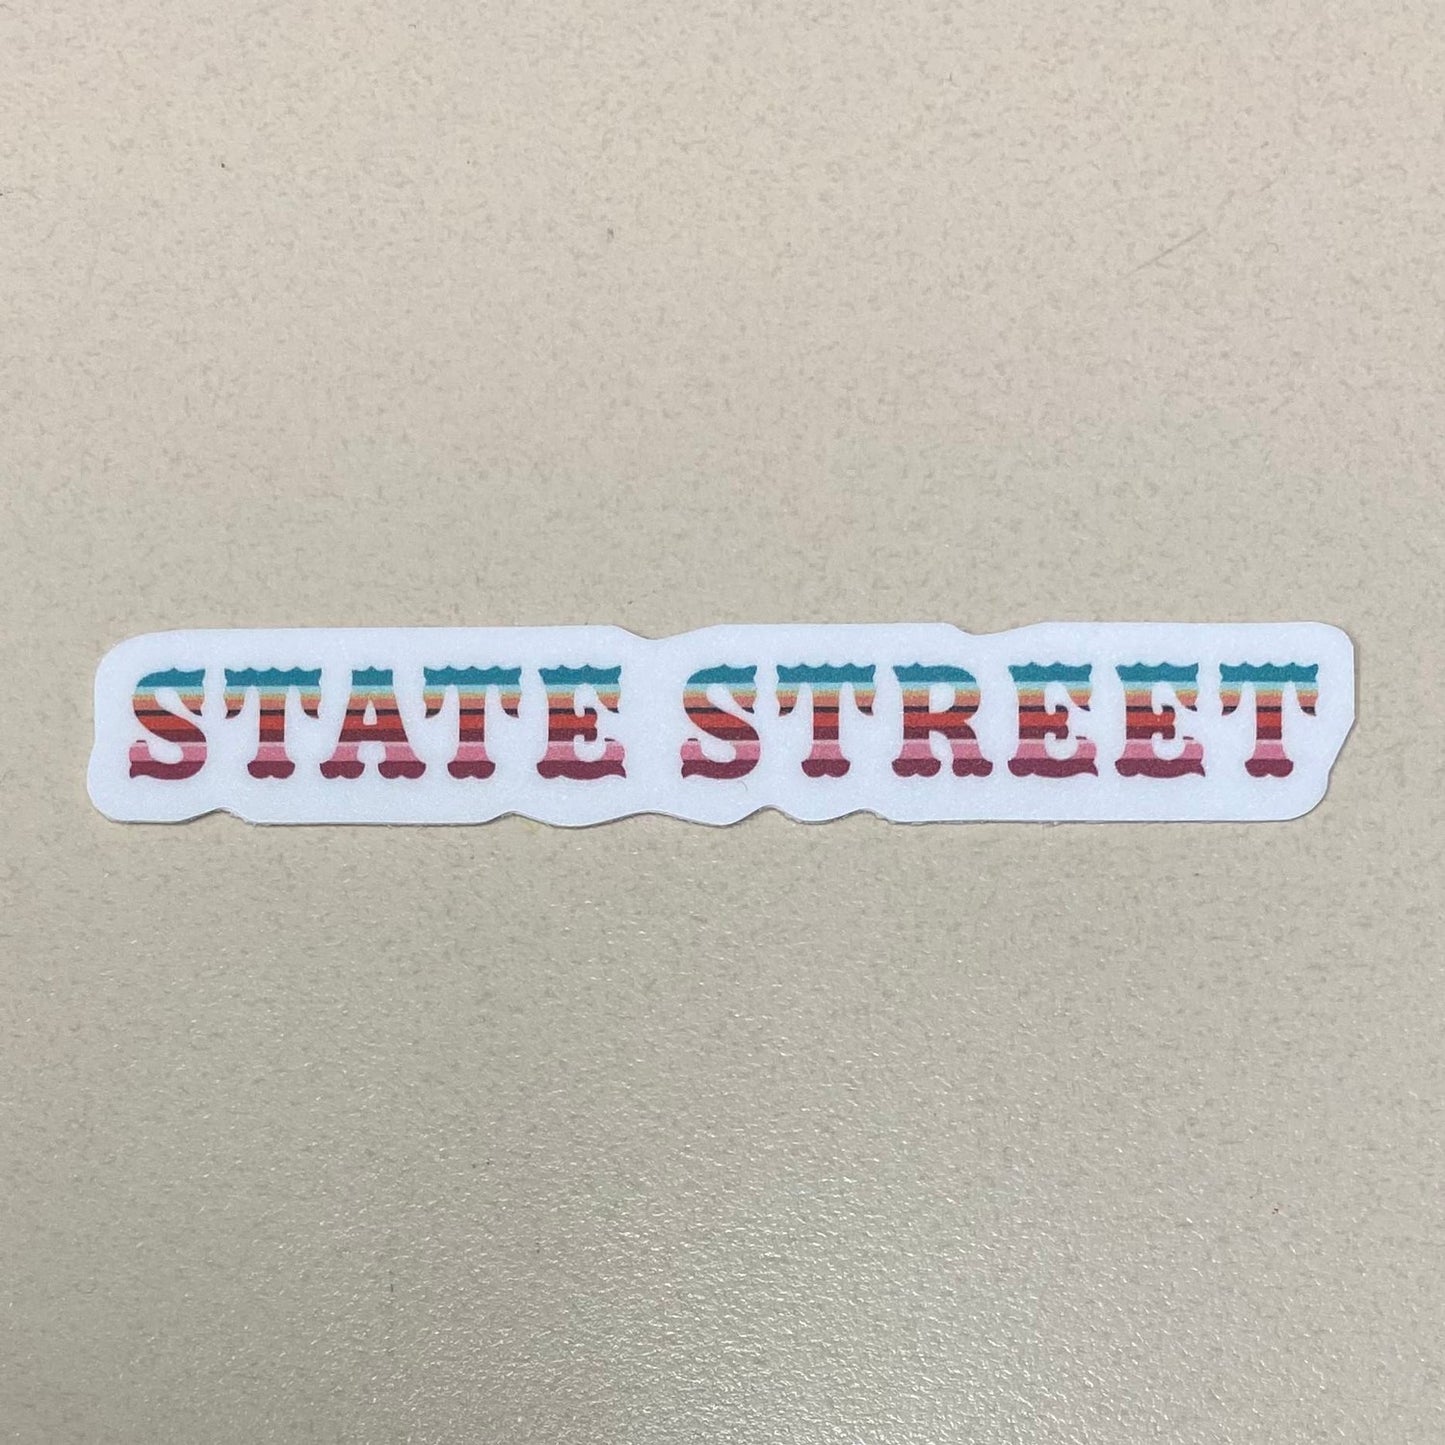 NAME DROP STICKERS